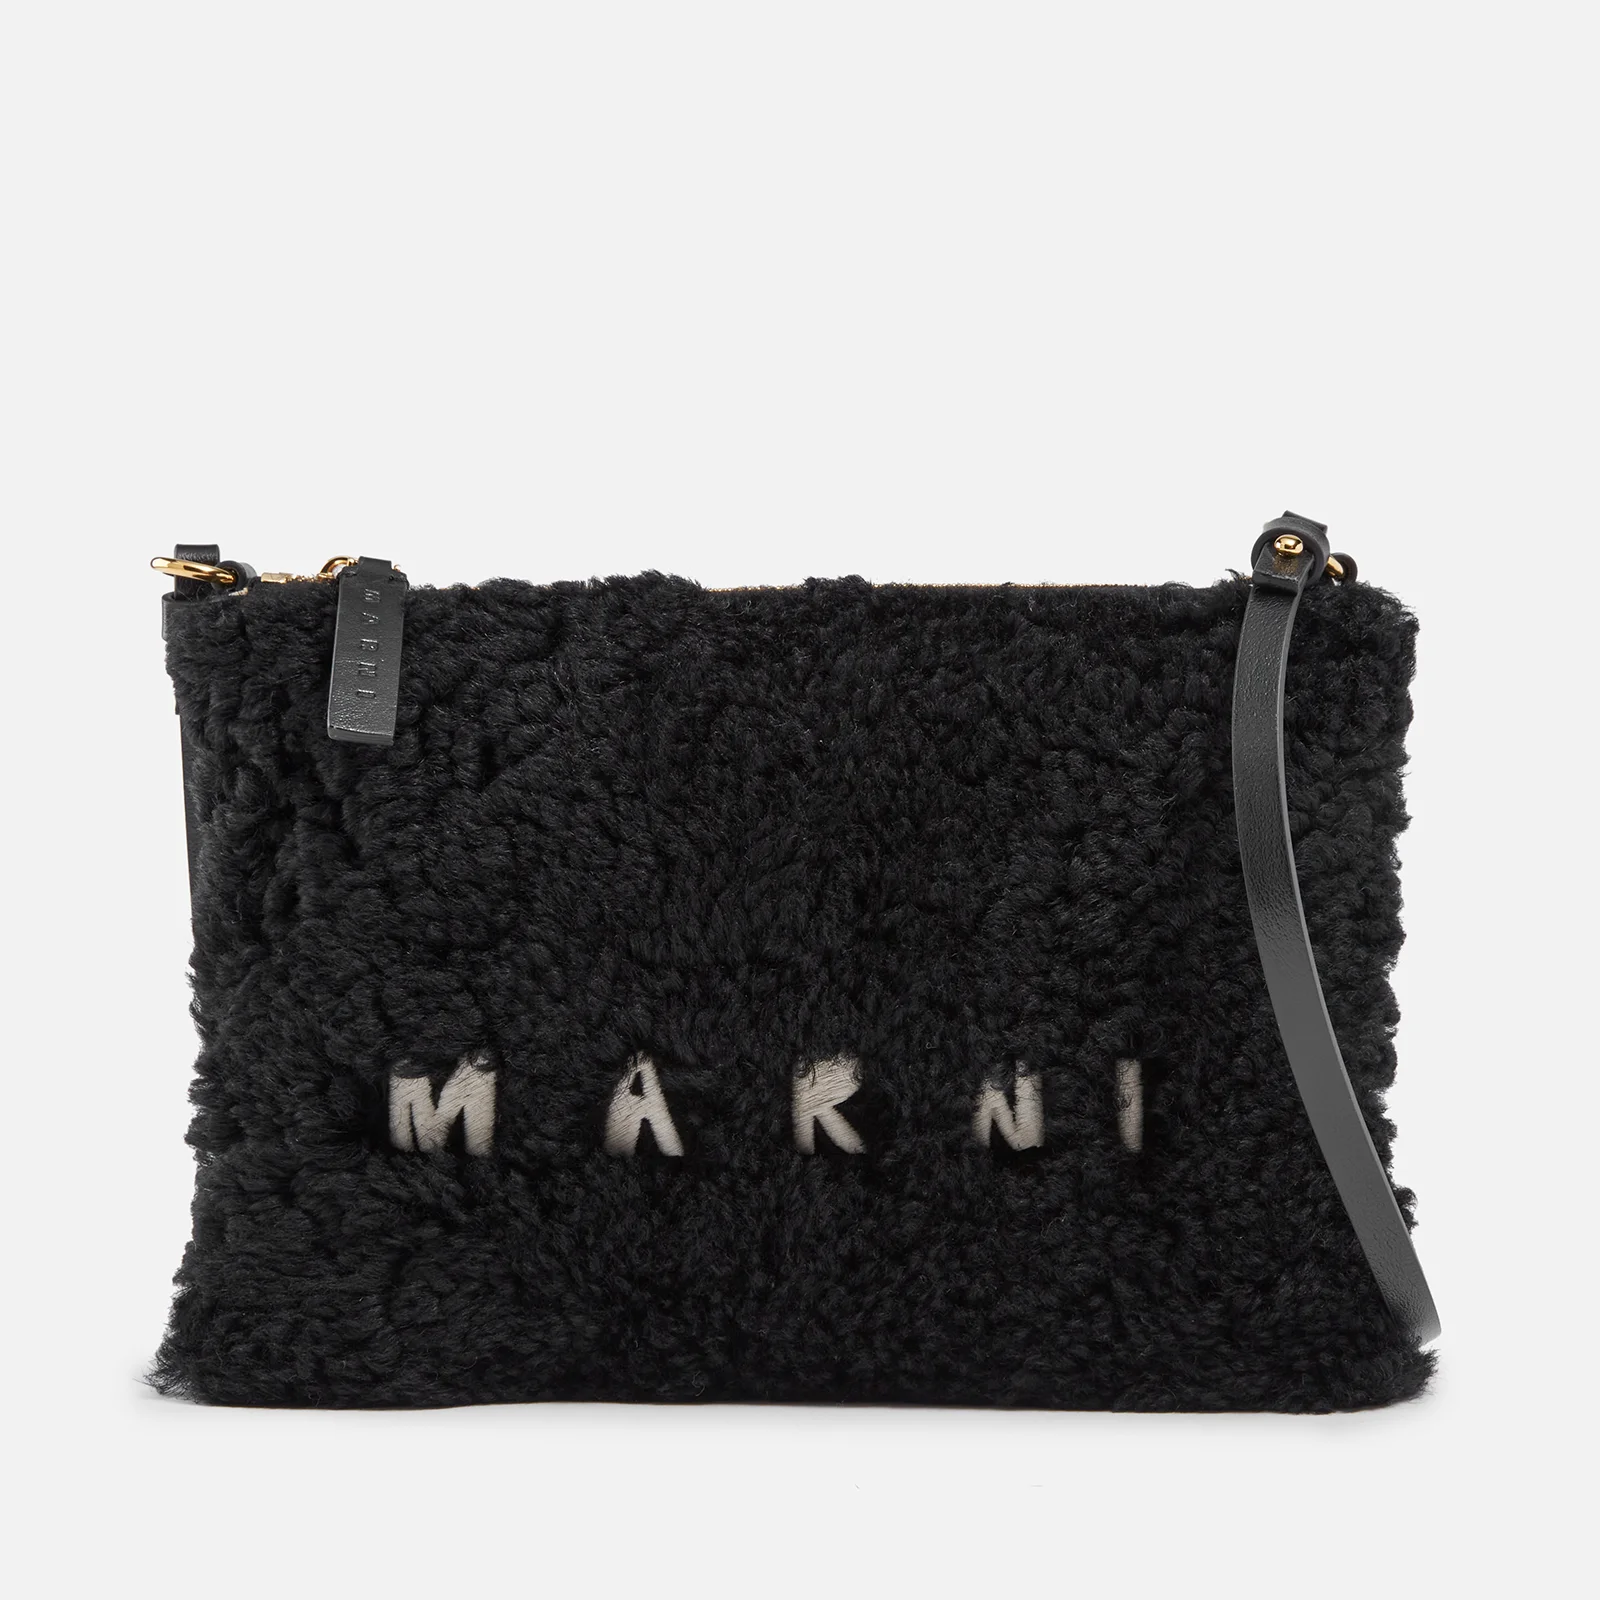 Marni Embroidered Shearling and Leather Shoulder Bag Image 1